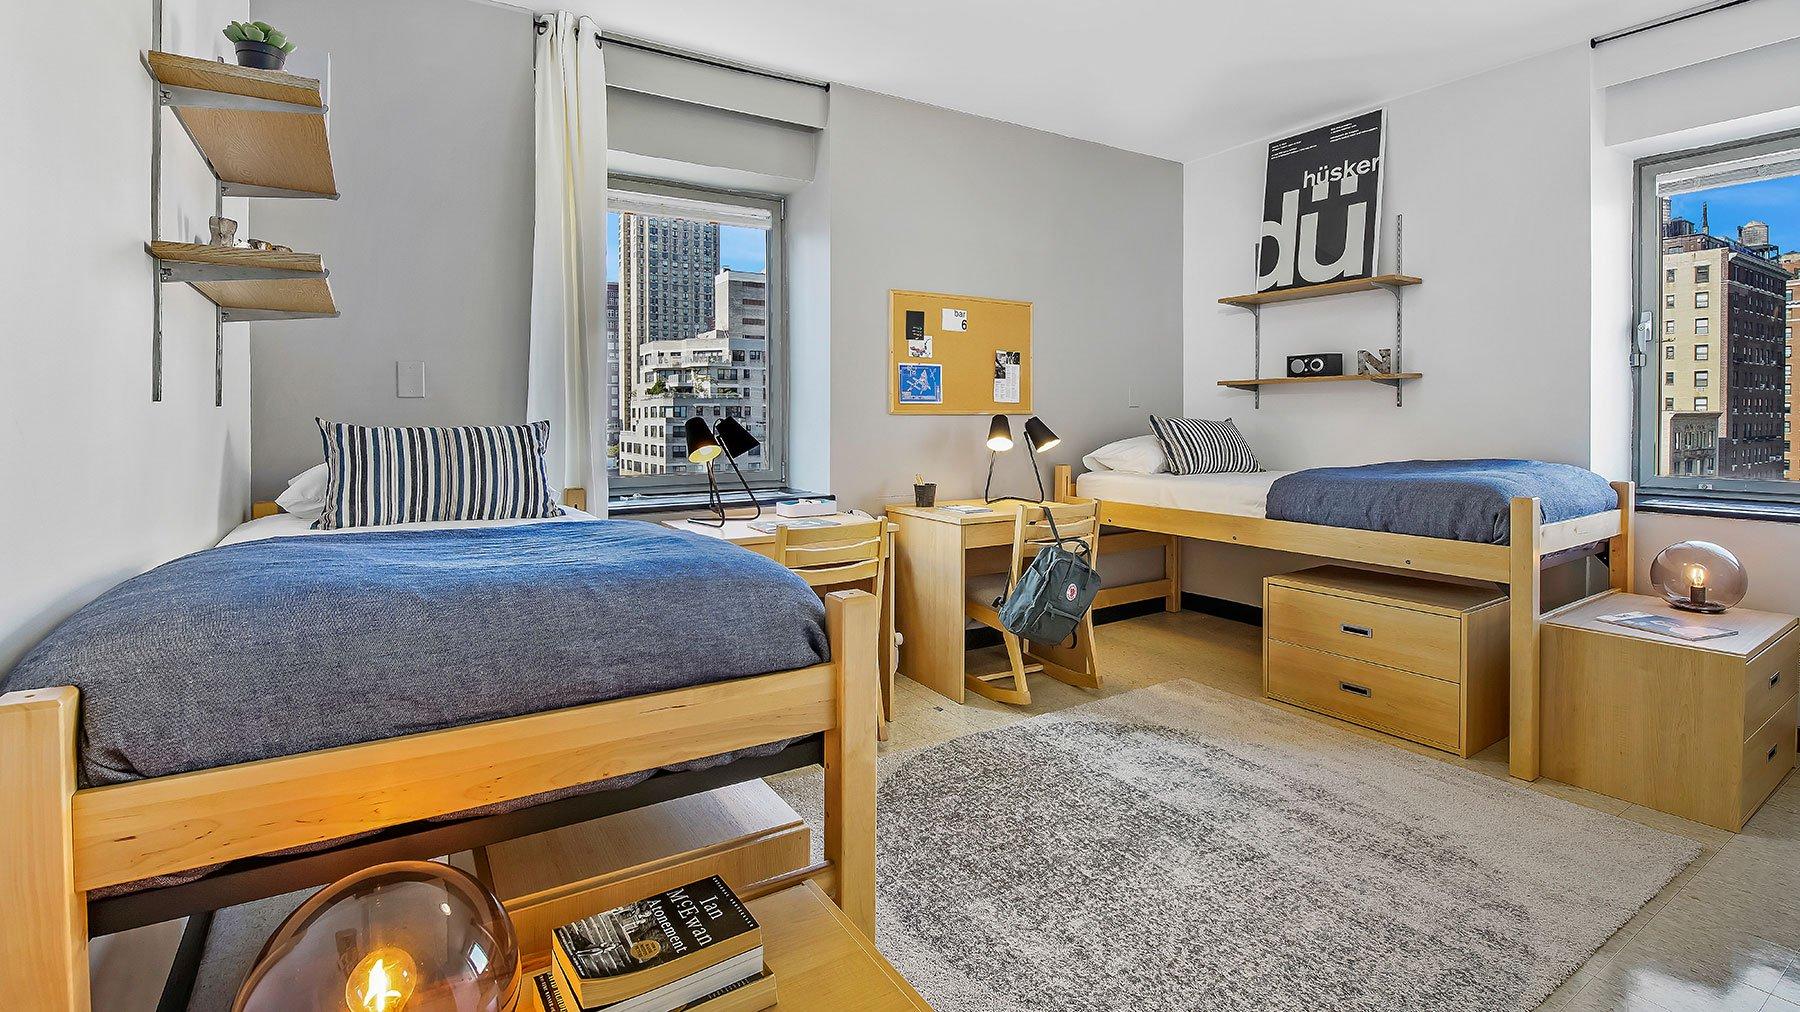 Typical homes for rent near NYU